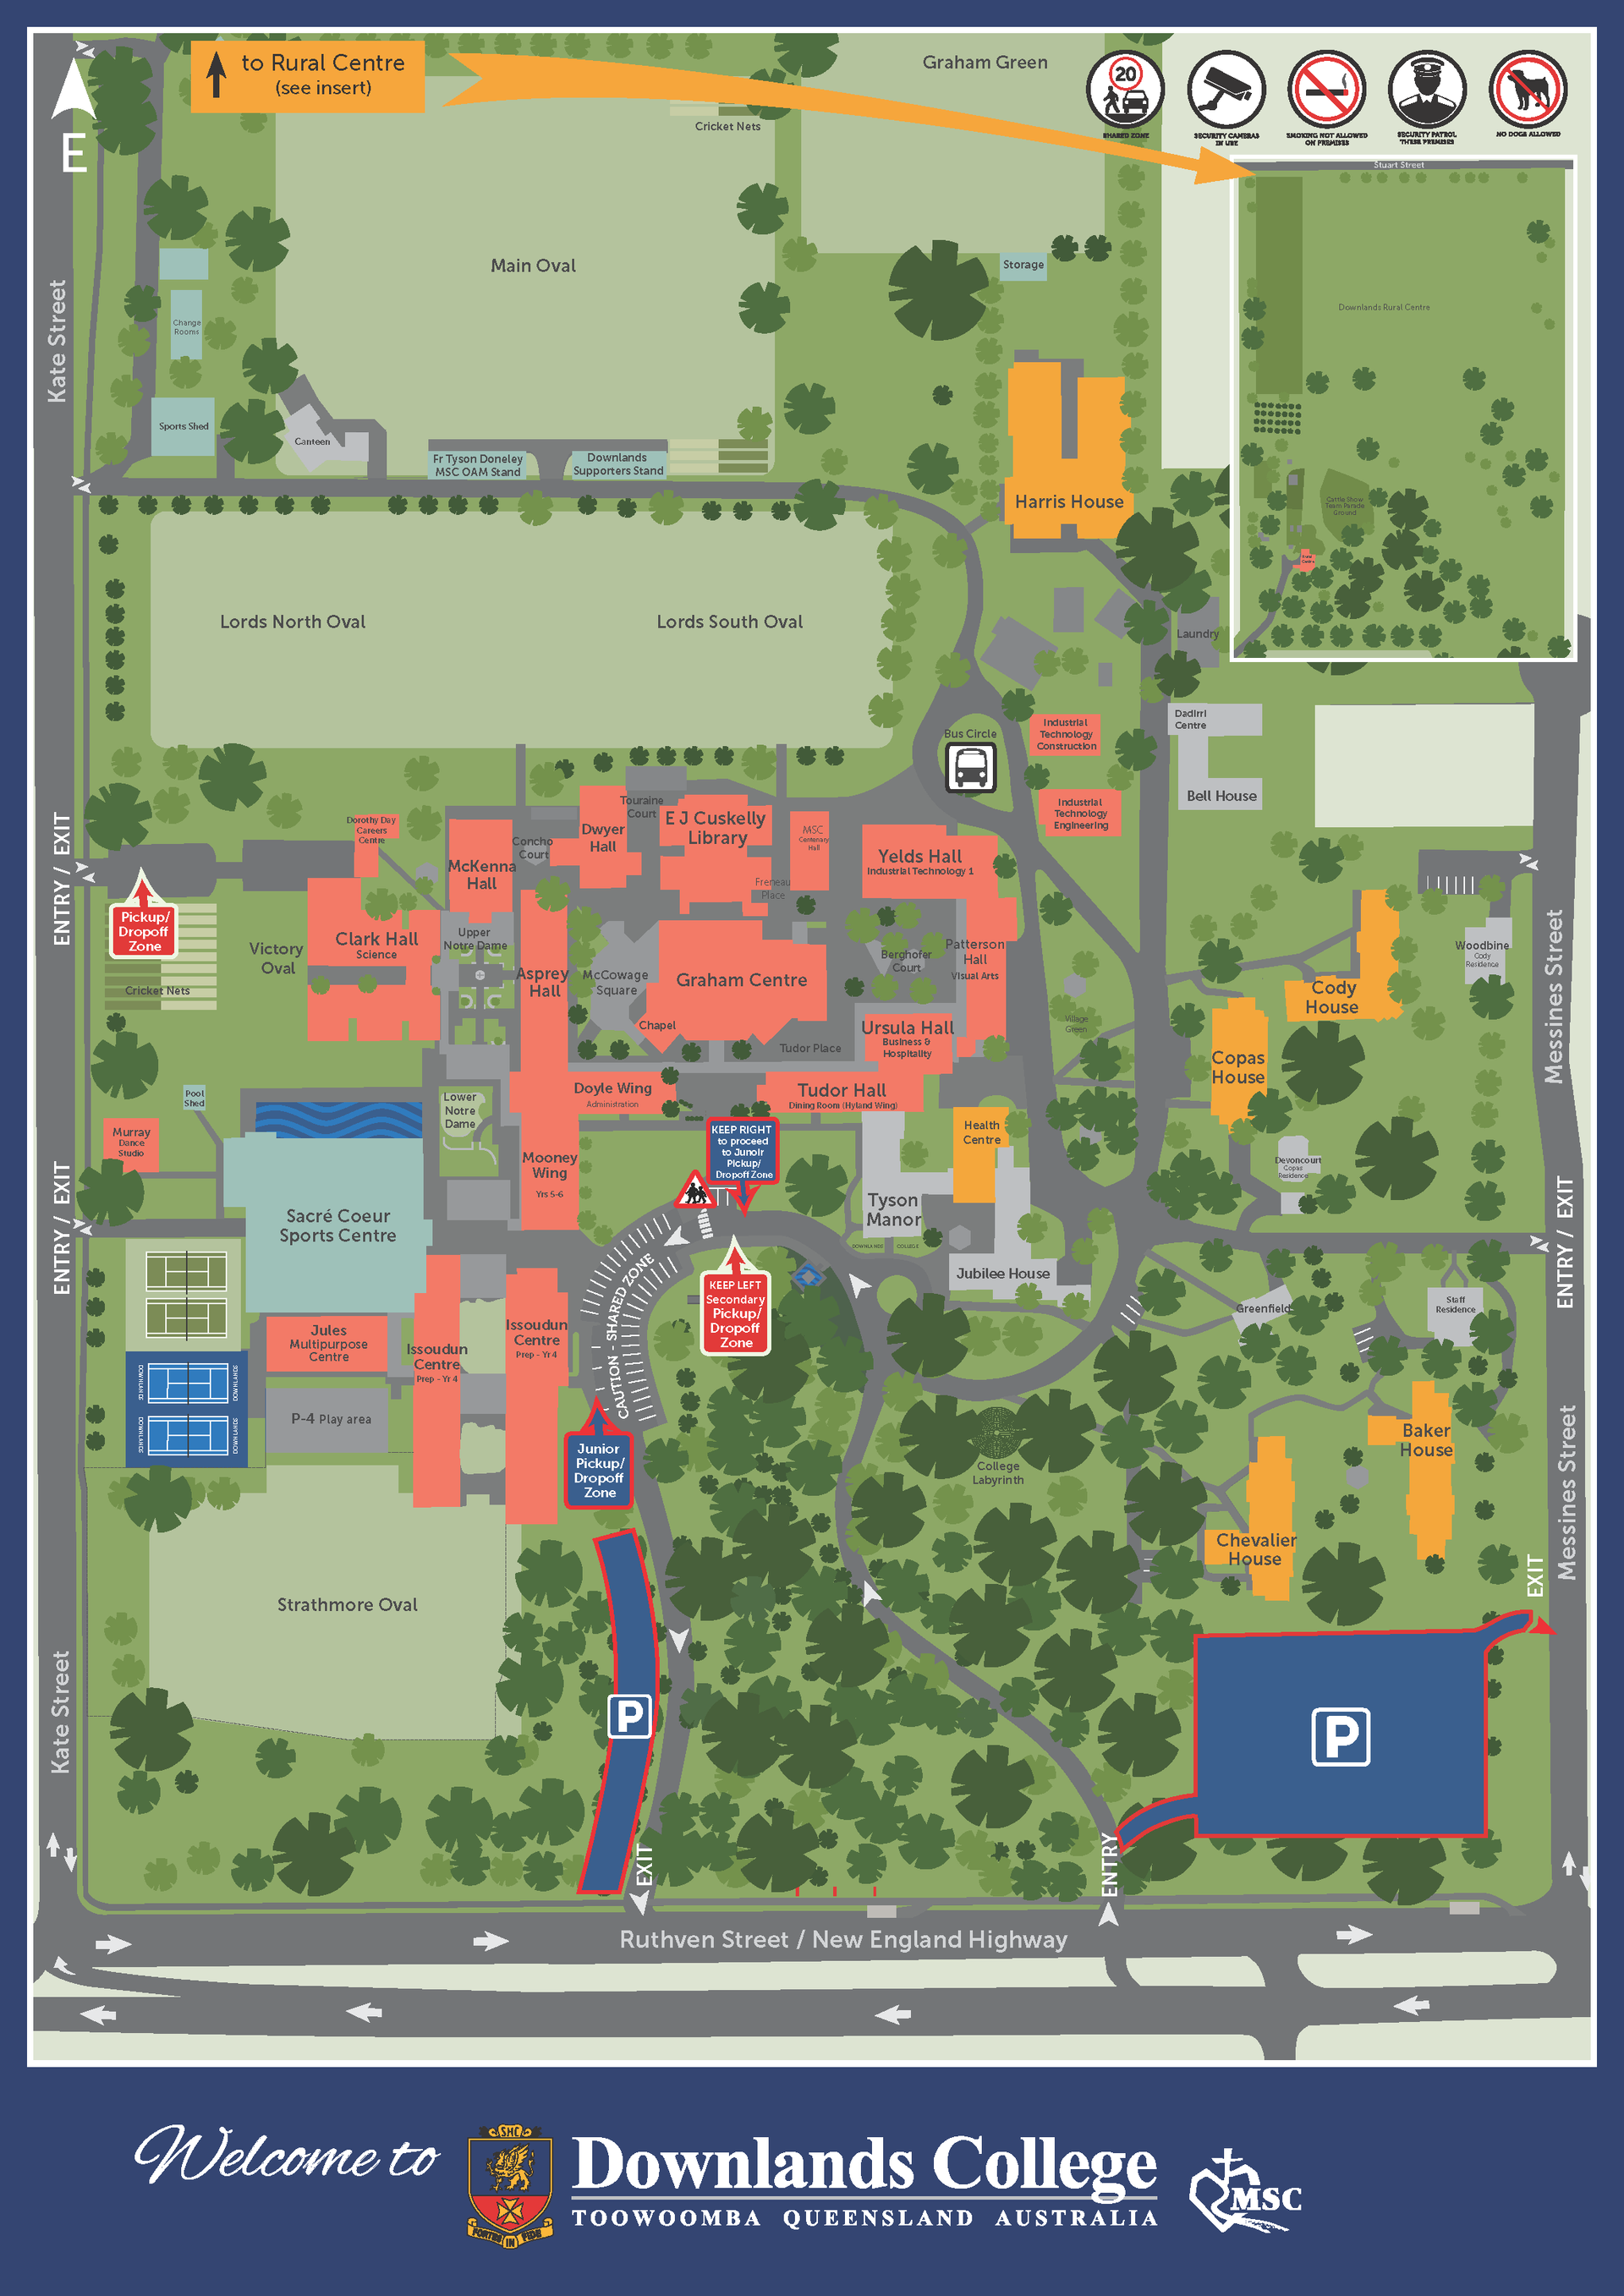 2023 DOWNLANDS COLLEGE MASTER MAP For Website Incl Parking And Dropoff Zones FINAL 1920w 